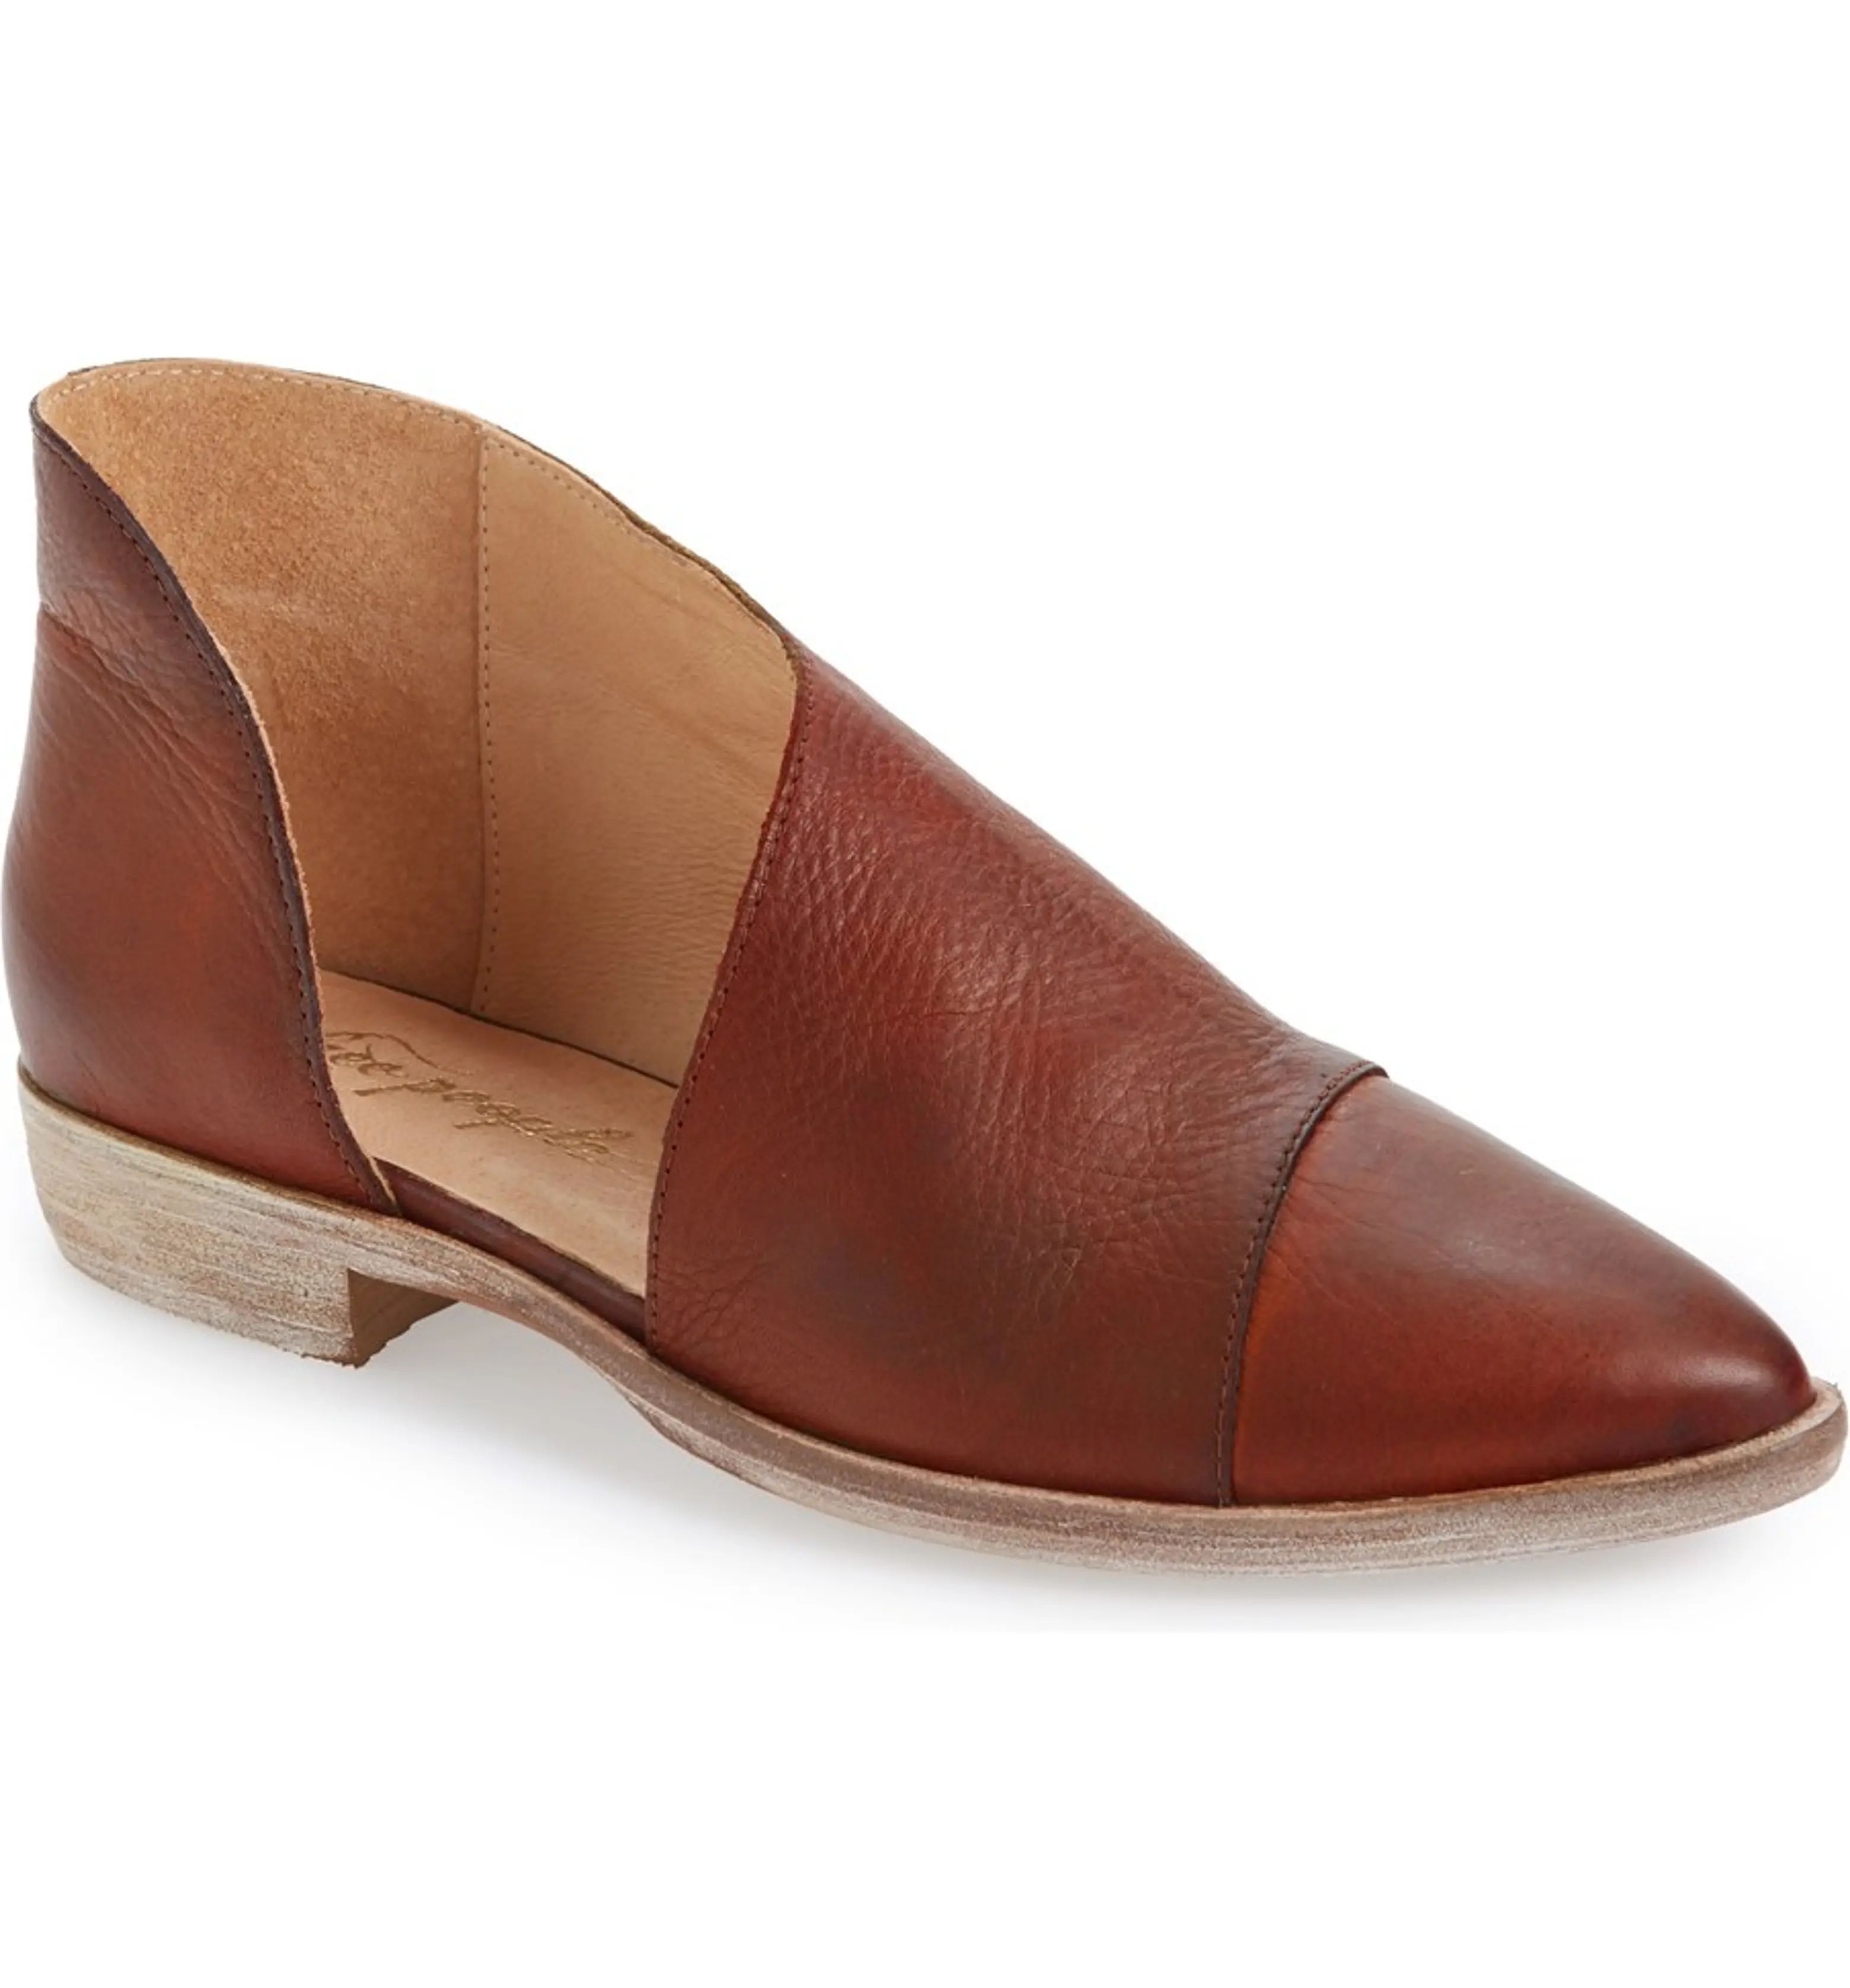 'Royale' Pointy Toe Flat | Nordstrom